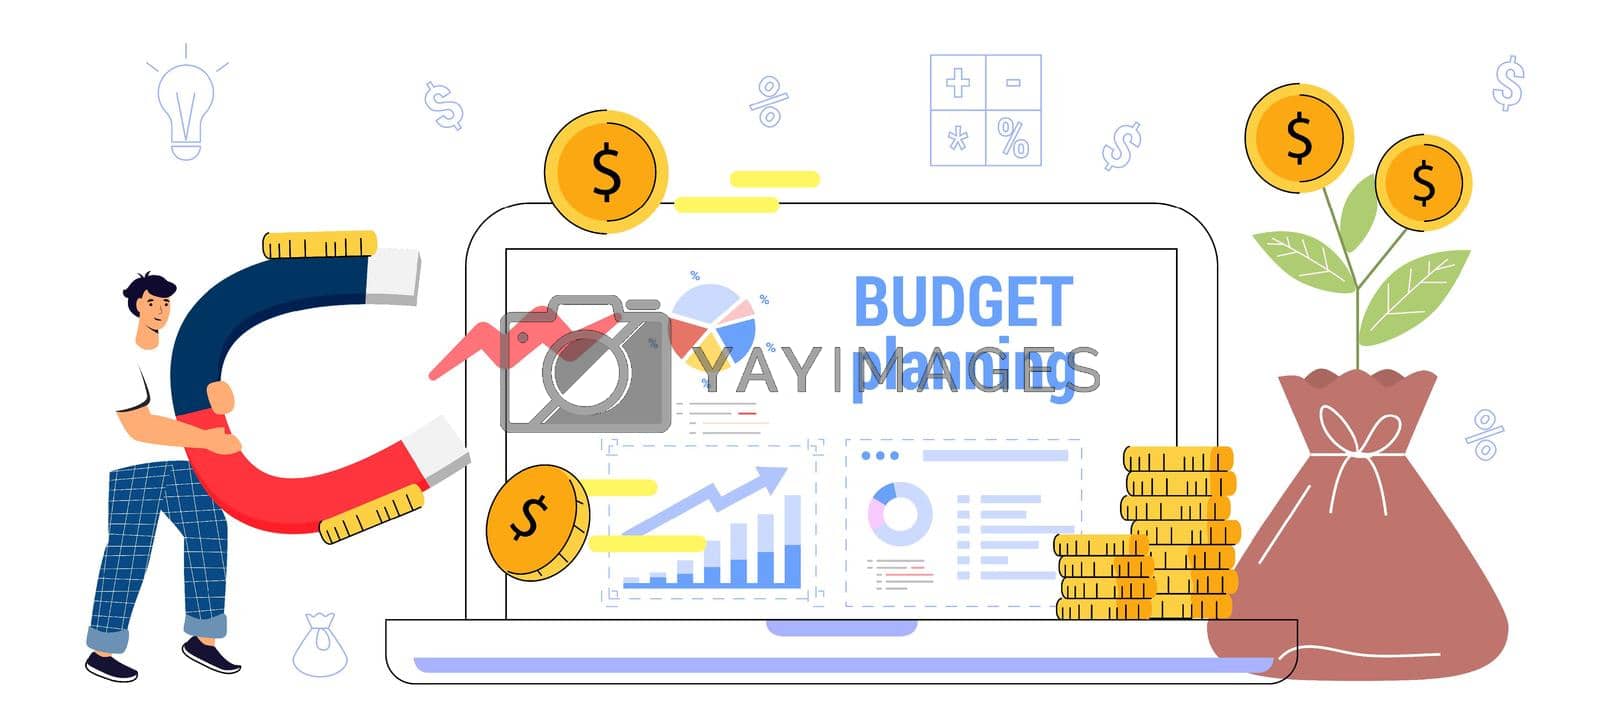 Royalty free image of Financial consultant app for earnings and expenses control Budget planning by JulsIst